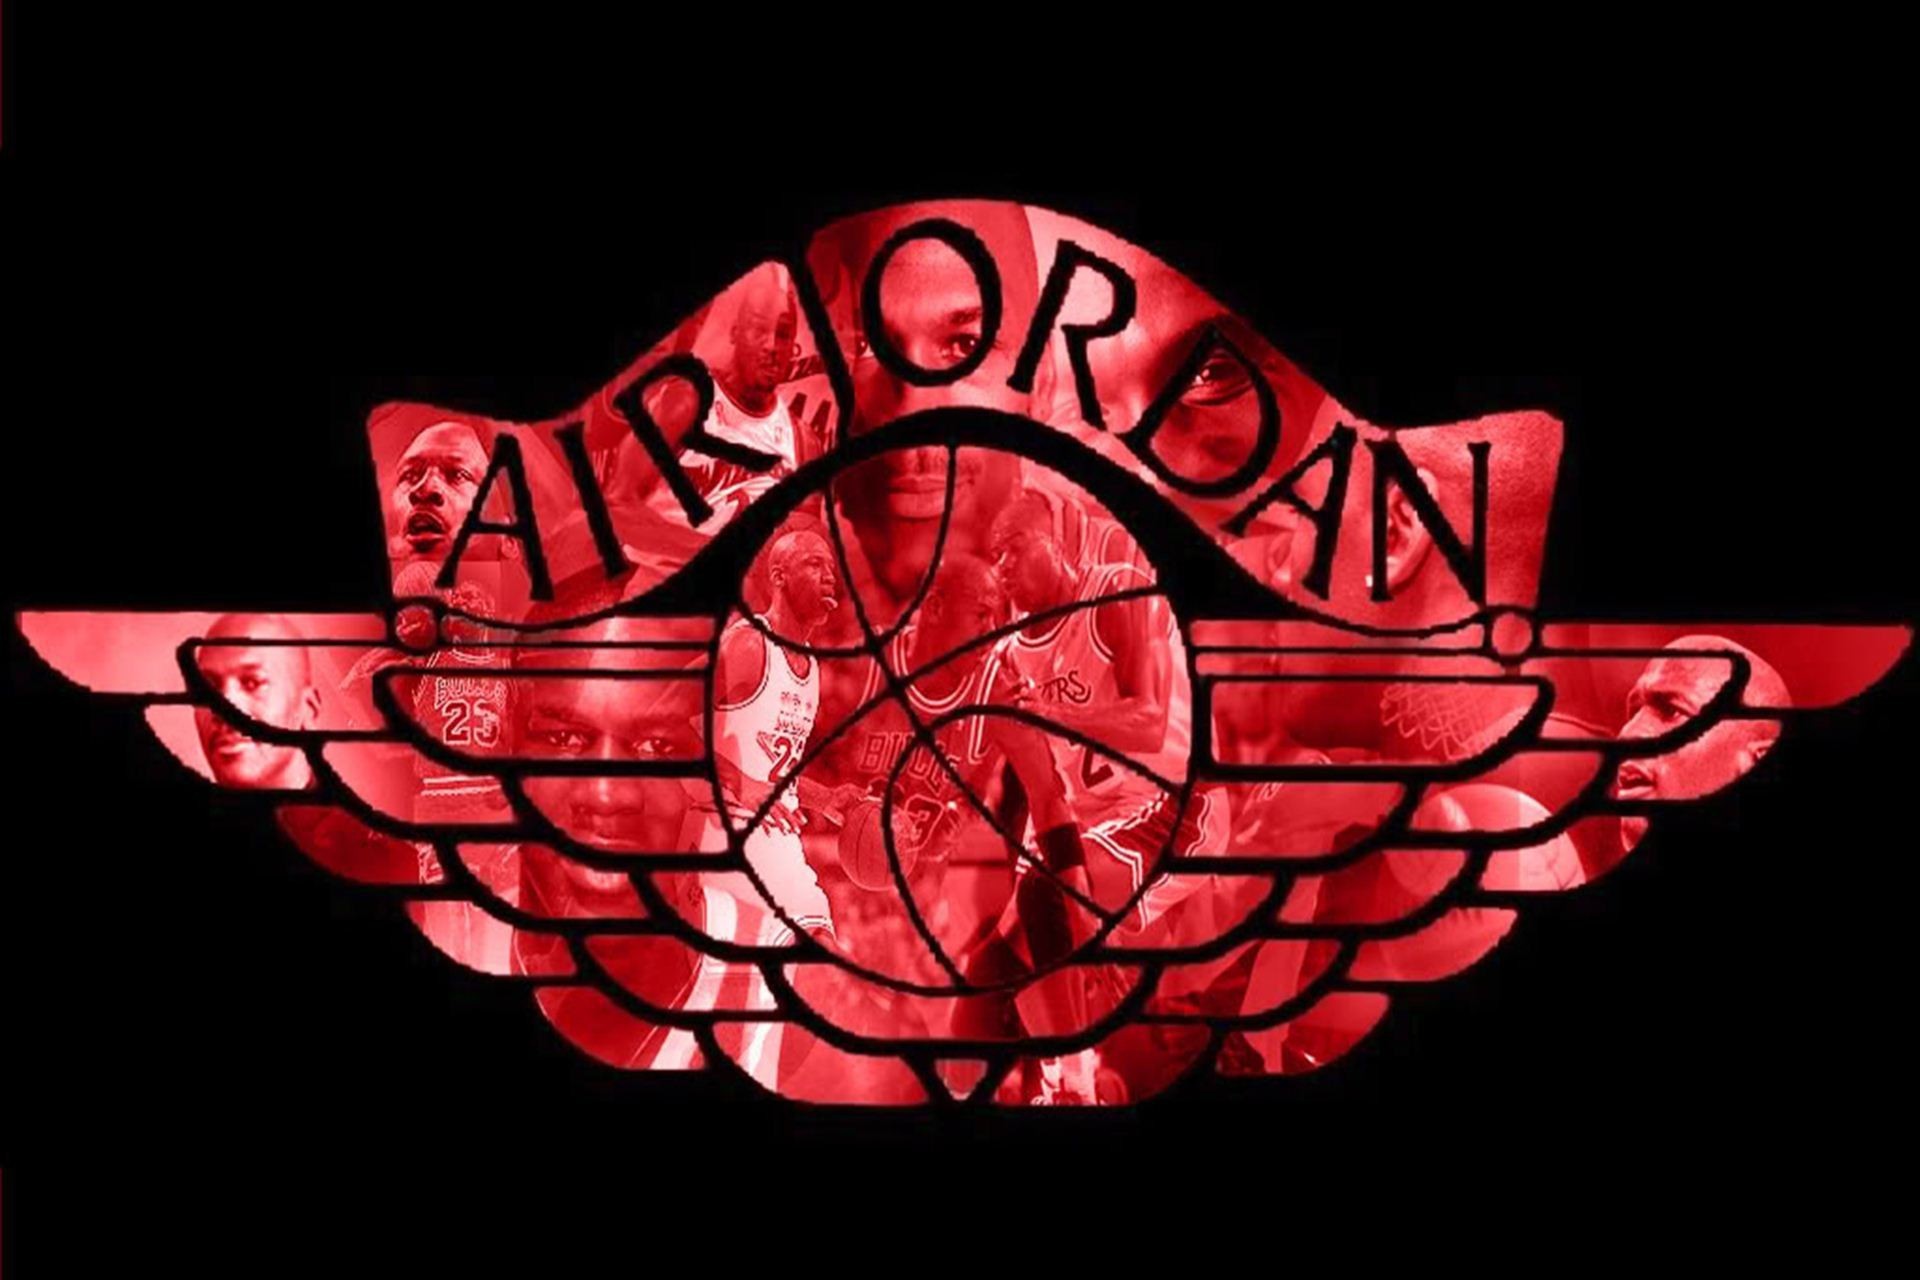 1920x1280 air jordan logo hd wallpapers hd wallpapers download free windows wallpapers  amazing colourful 4k picture lovely